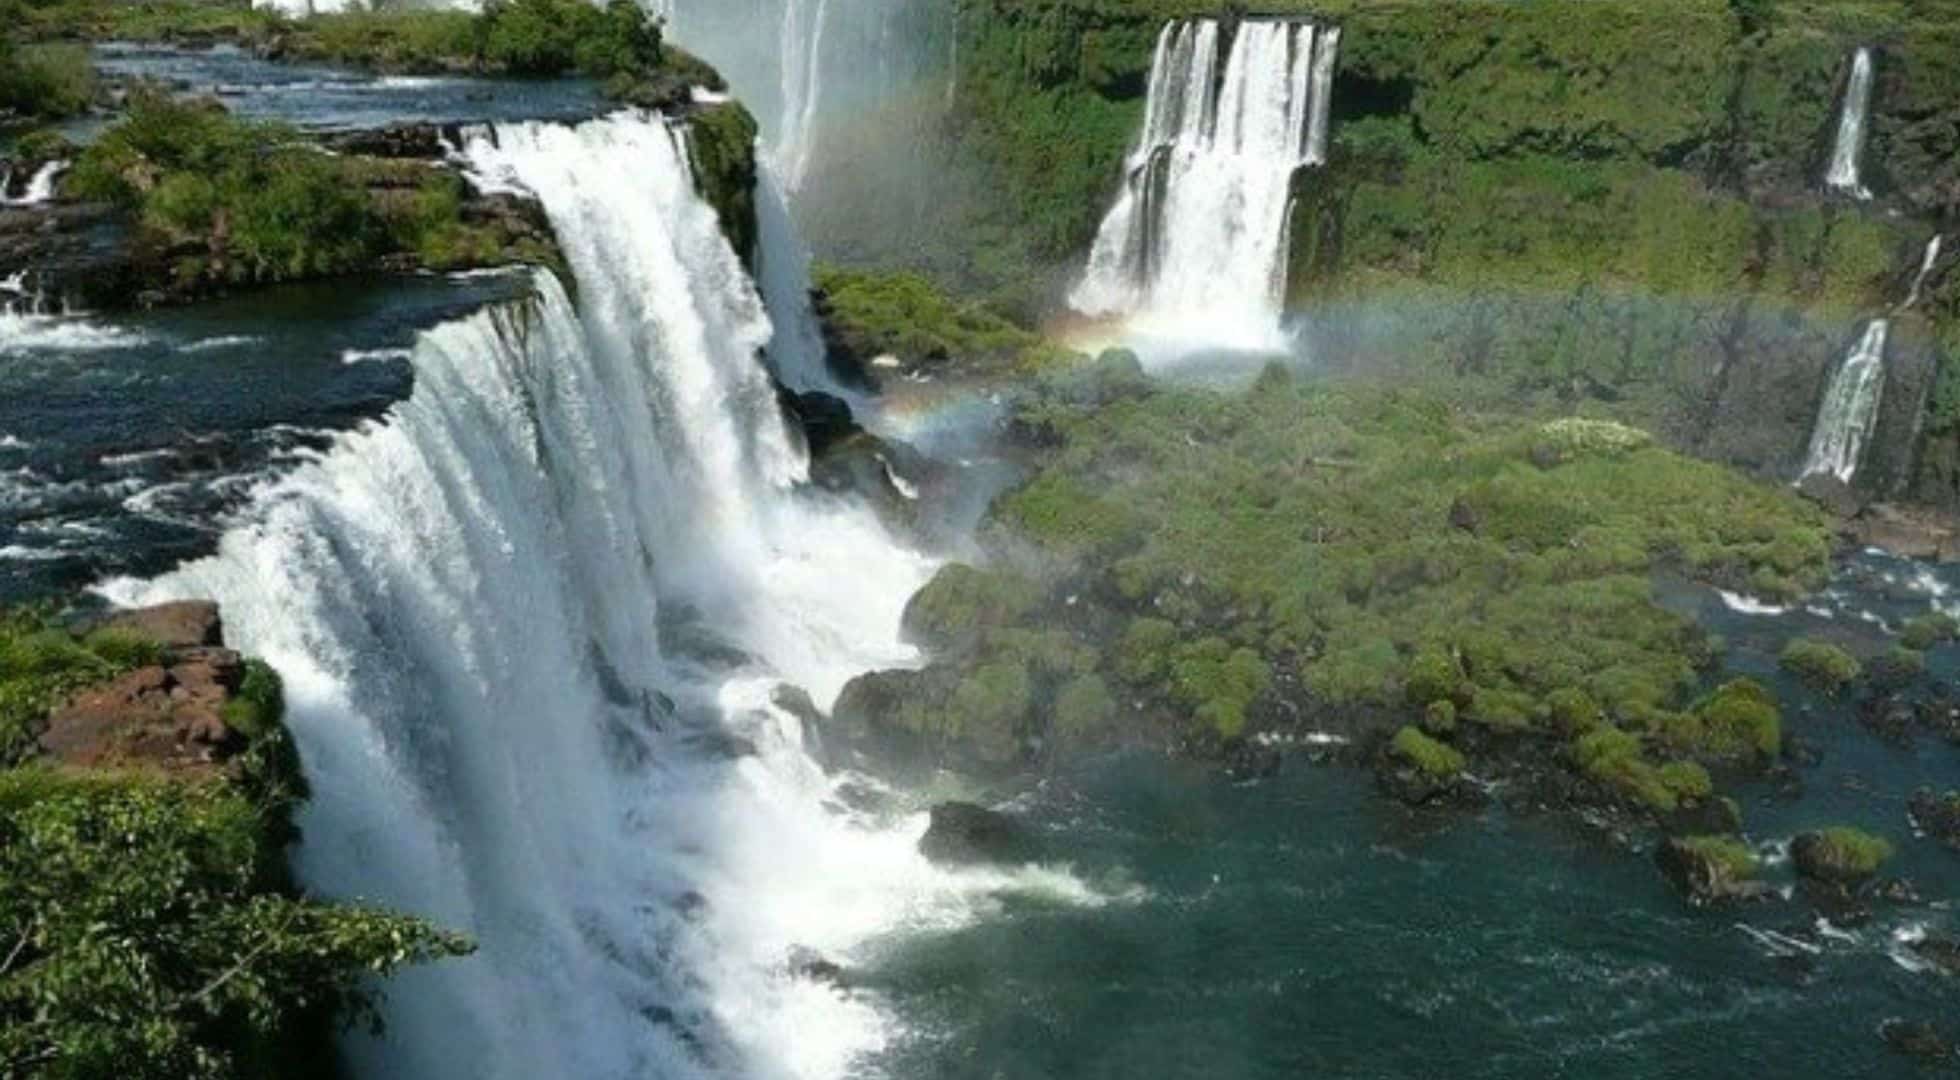 Brazil is home to great waterfalls